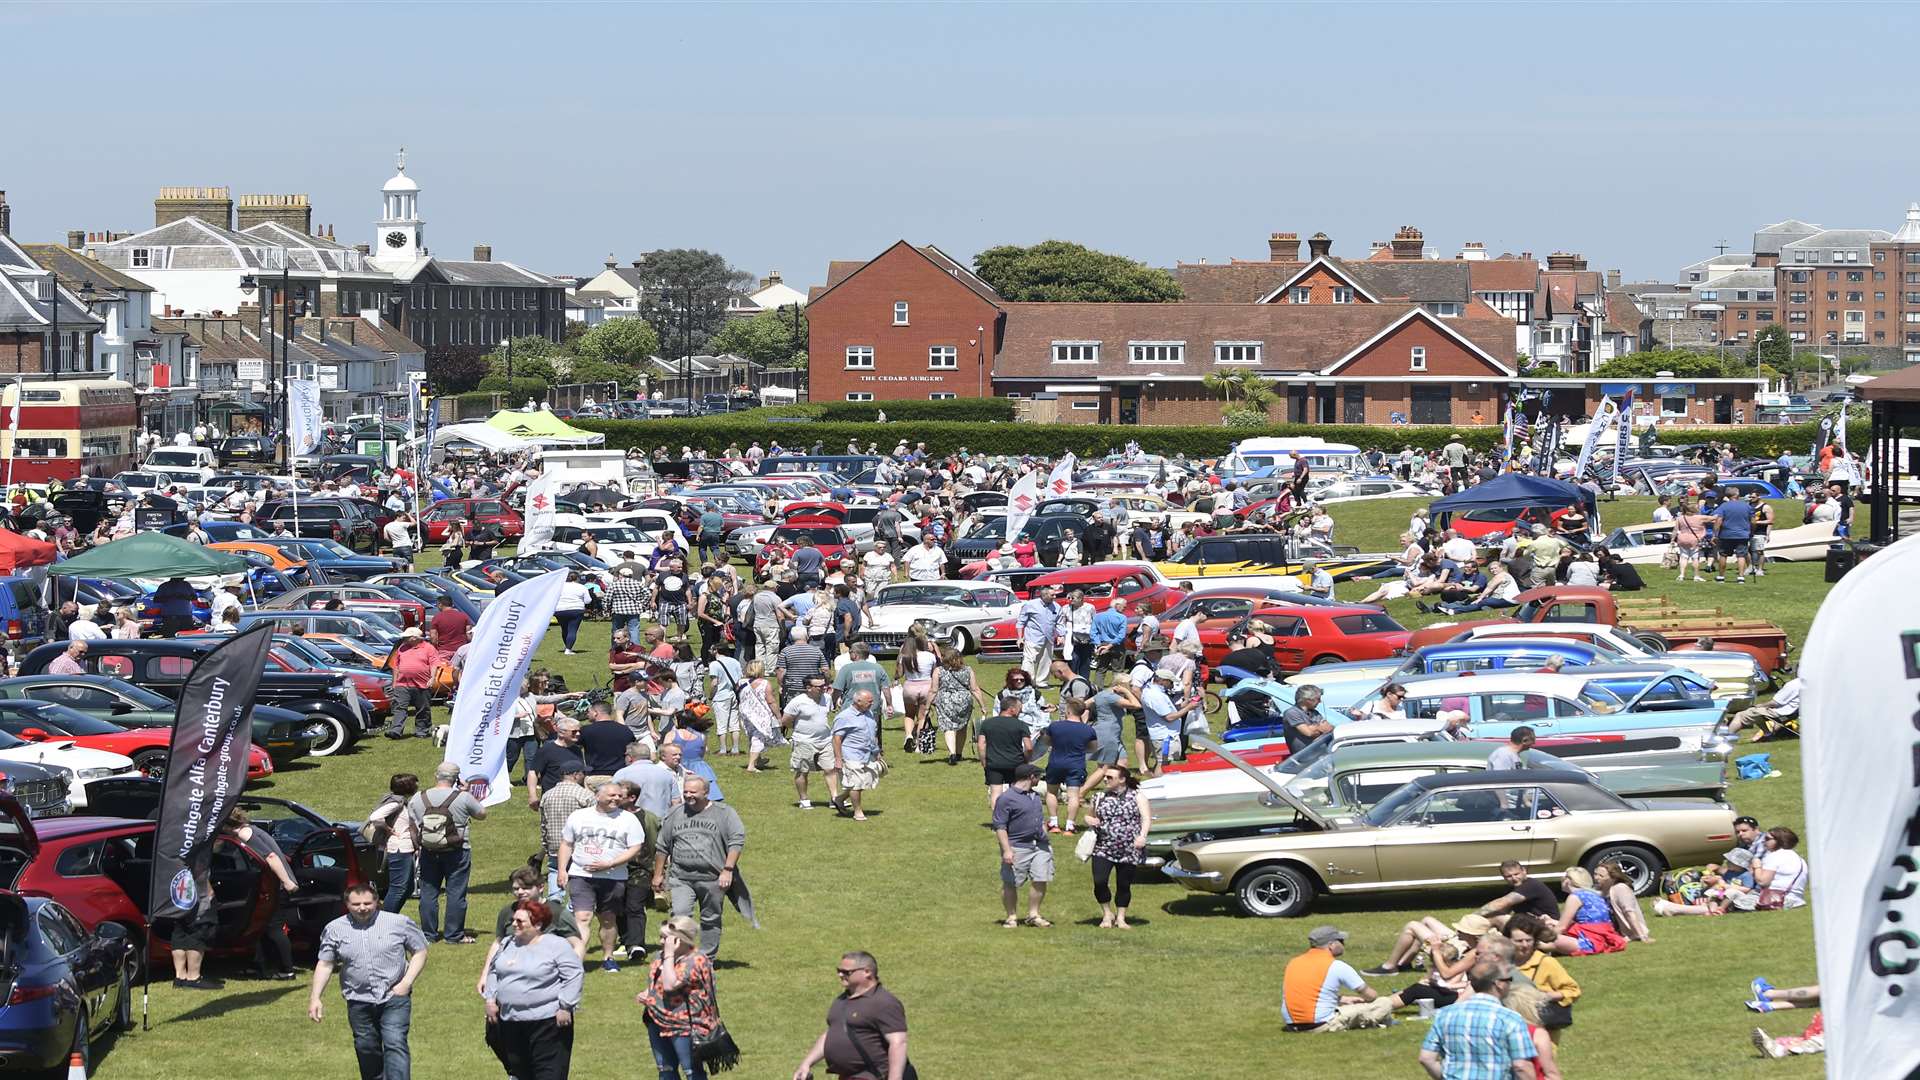 Thousands flocked to the seafront to catch a glimpse of the motors